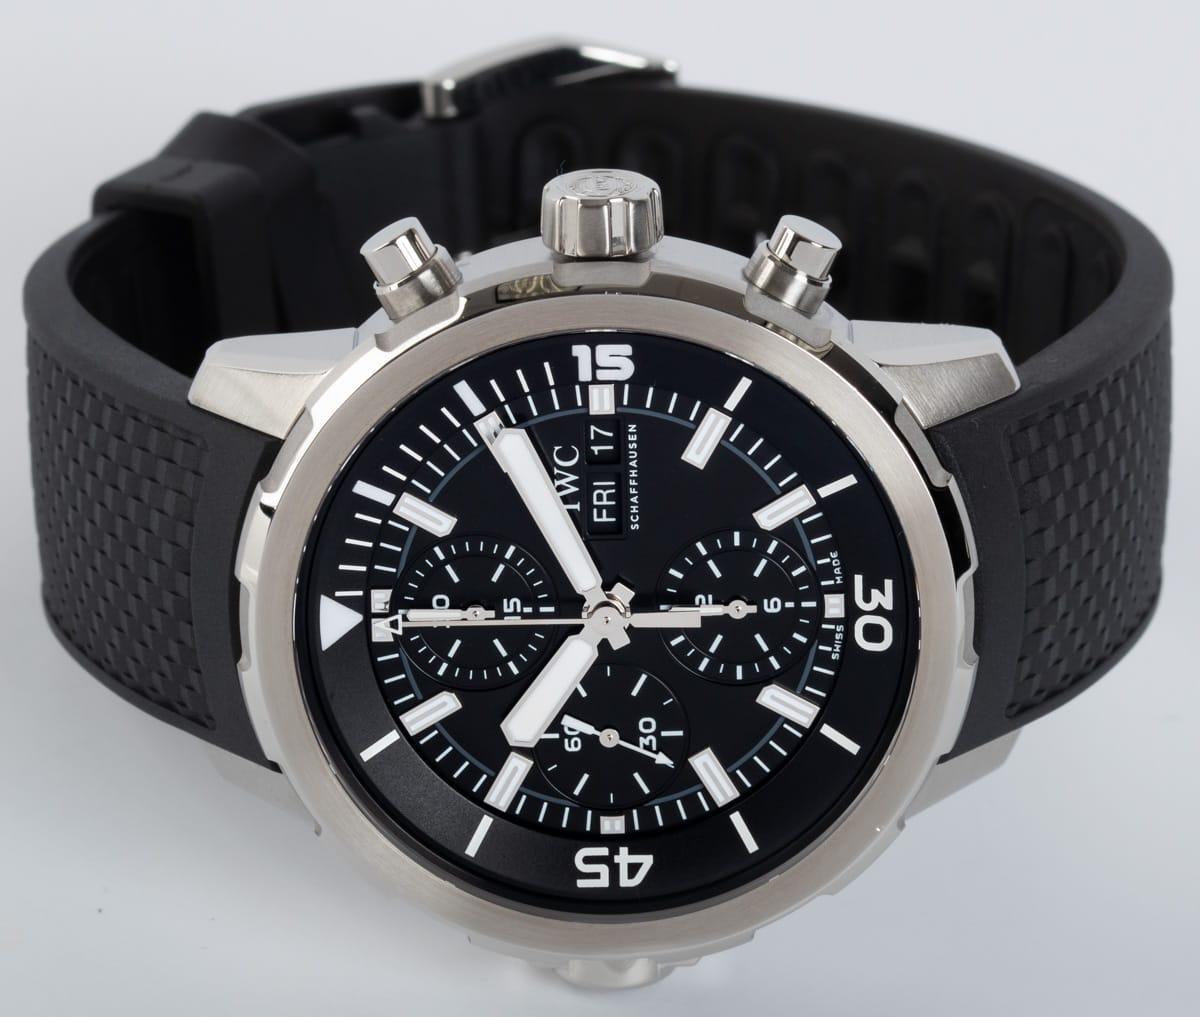 Front View of Aquatimer Chronograph